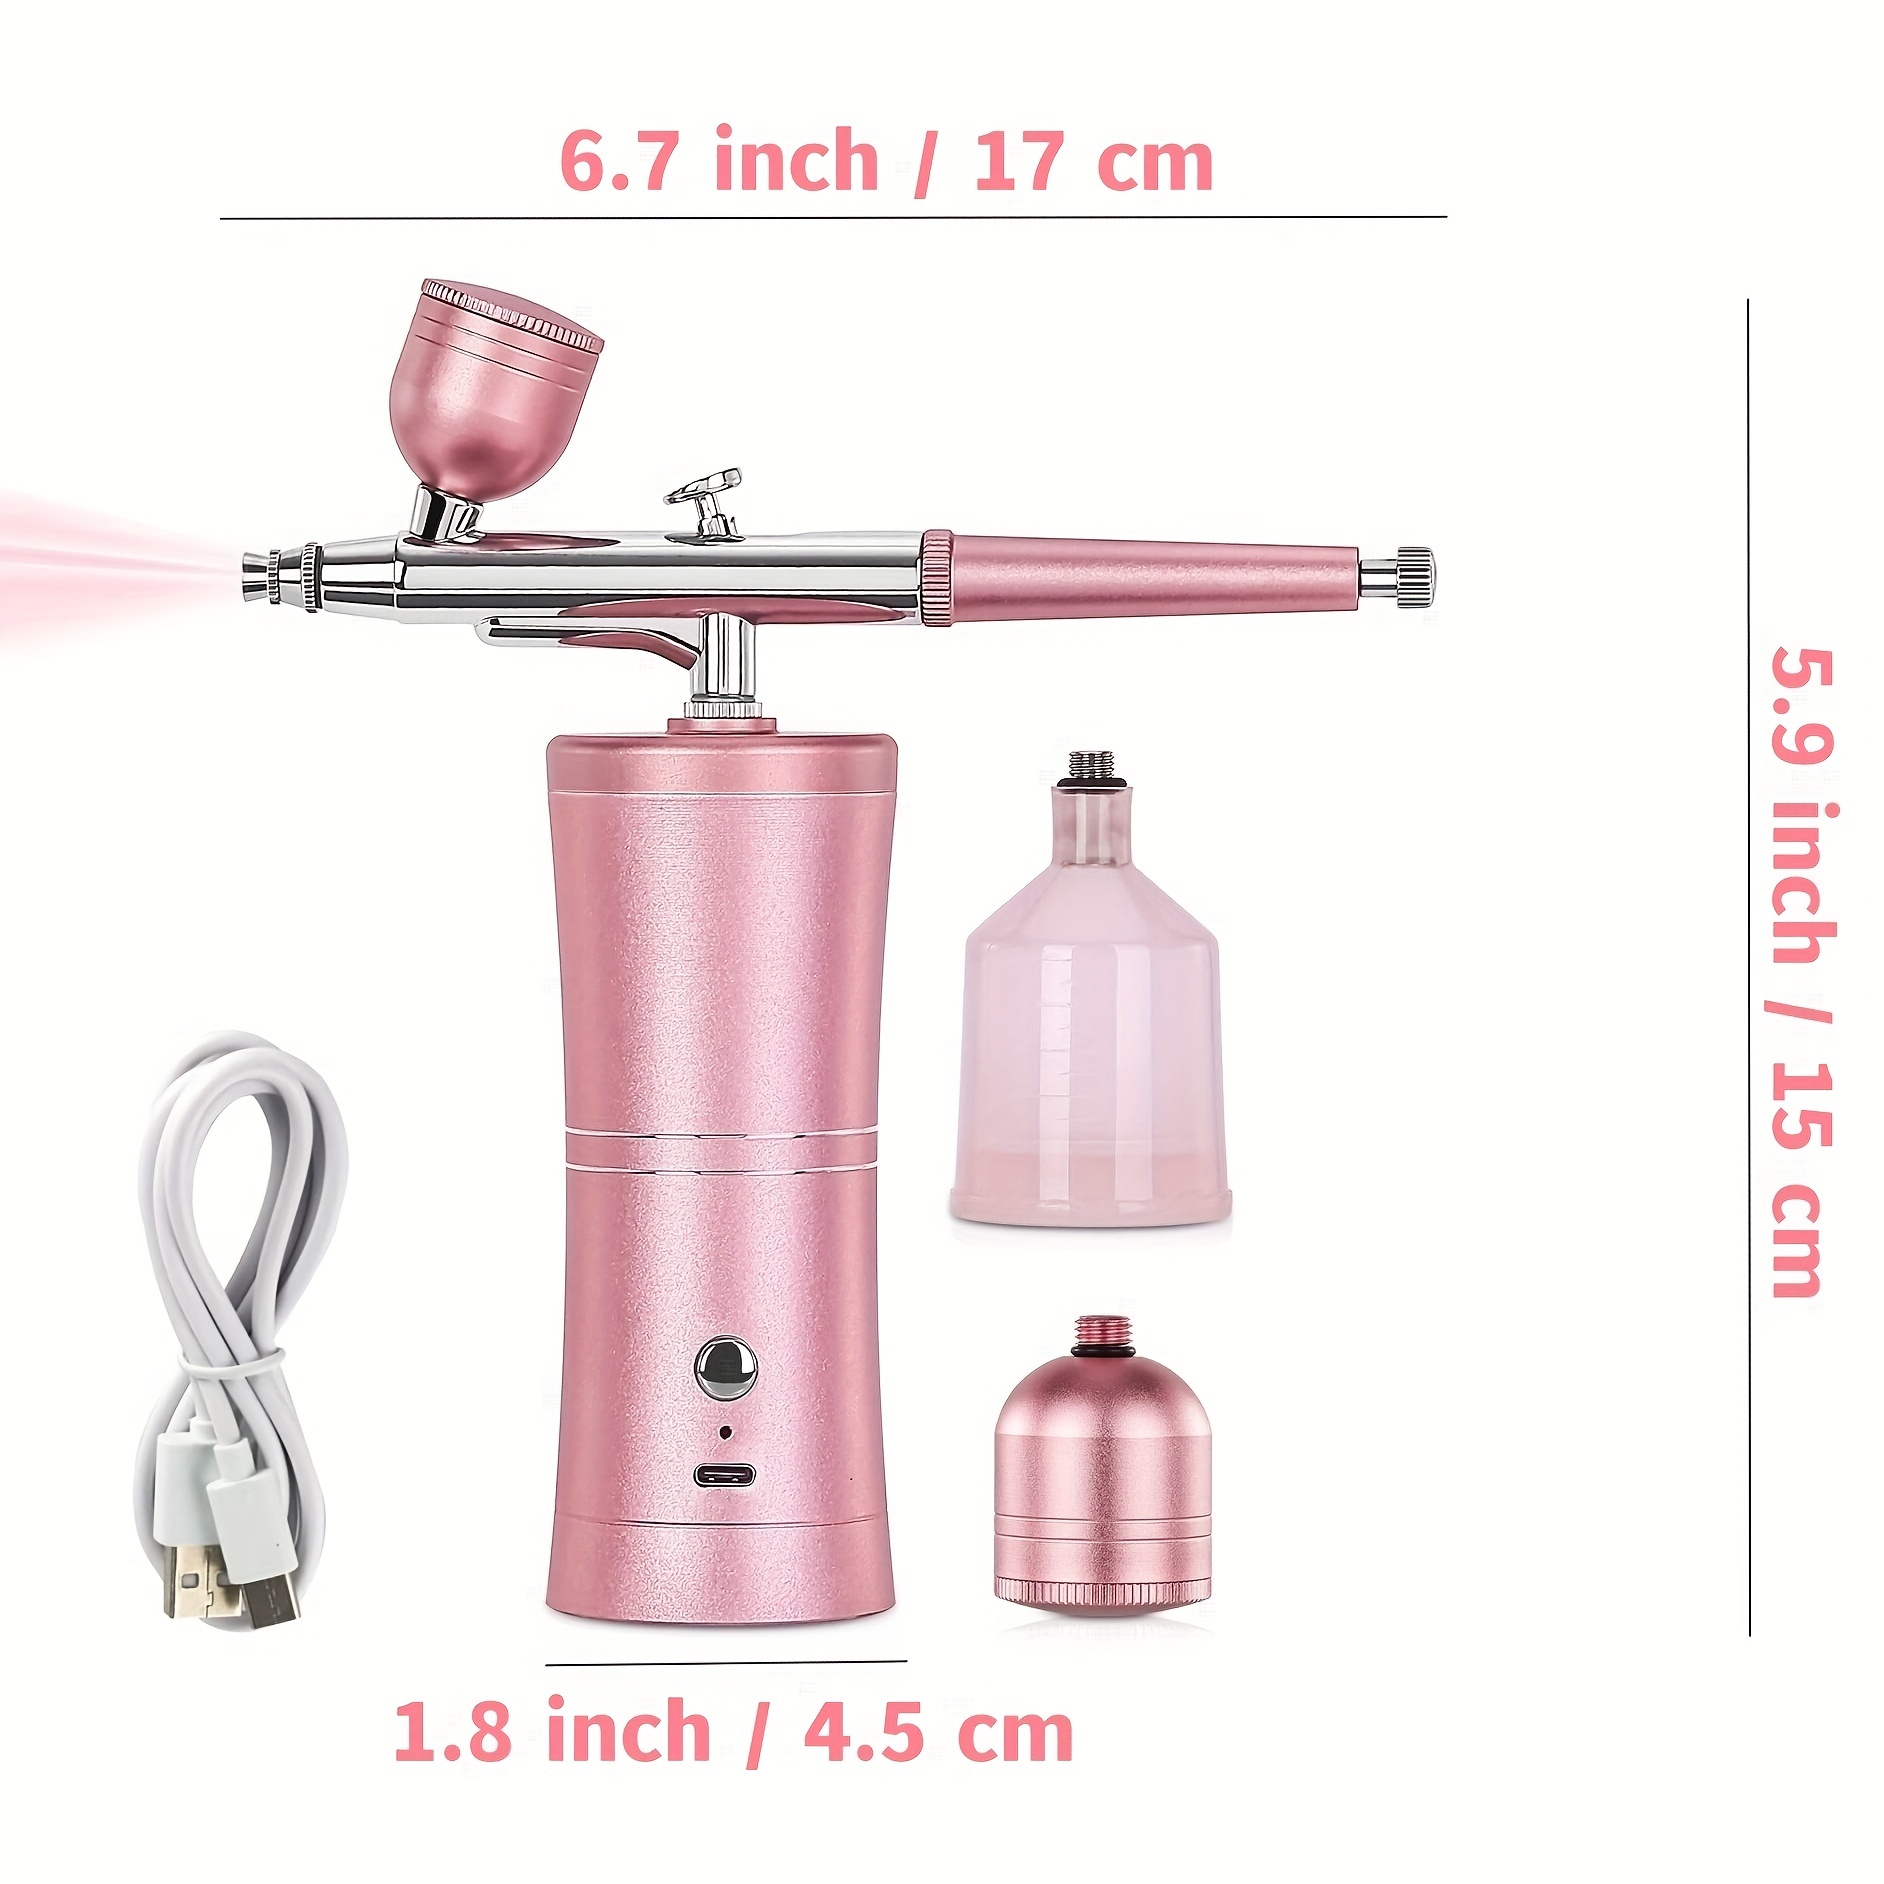 Upgraded Airbrush Kit with Compressor Pinkiou Portable Airbrush